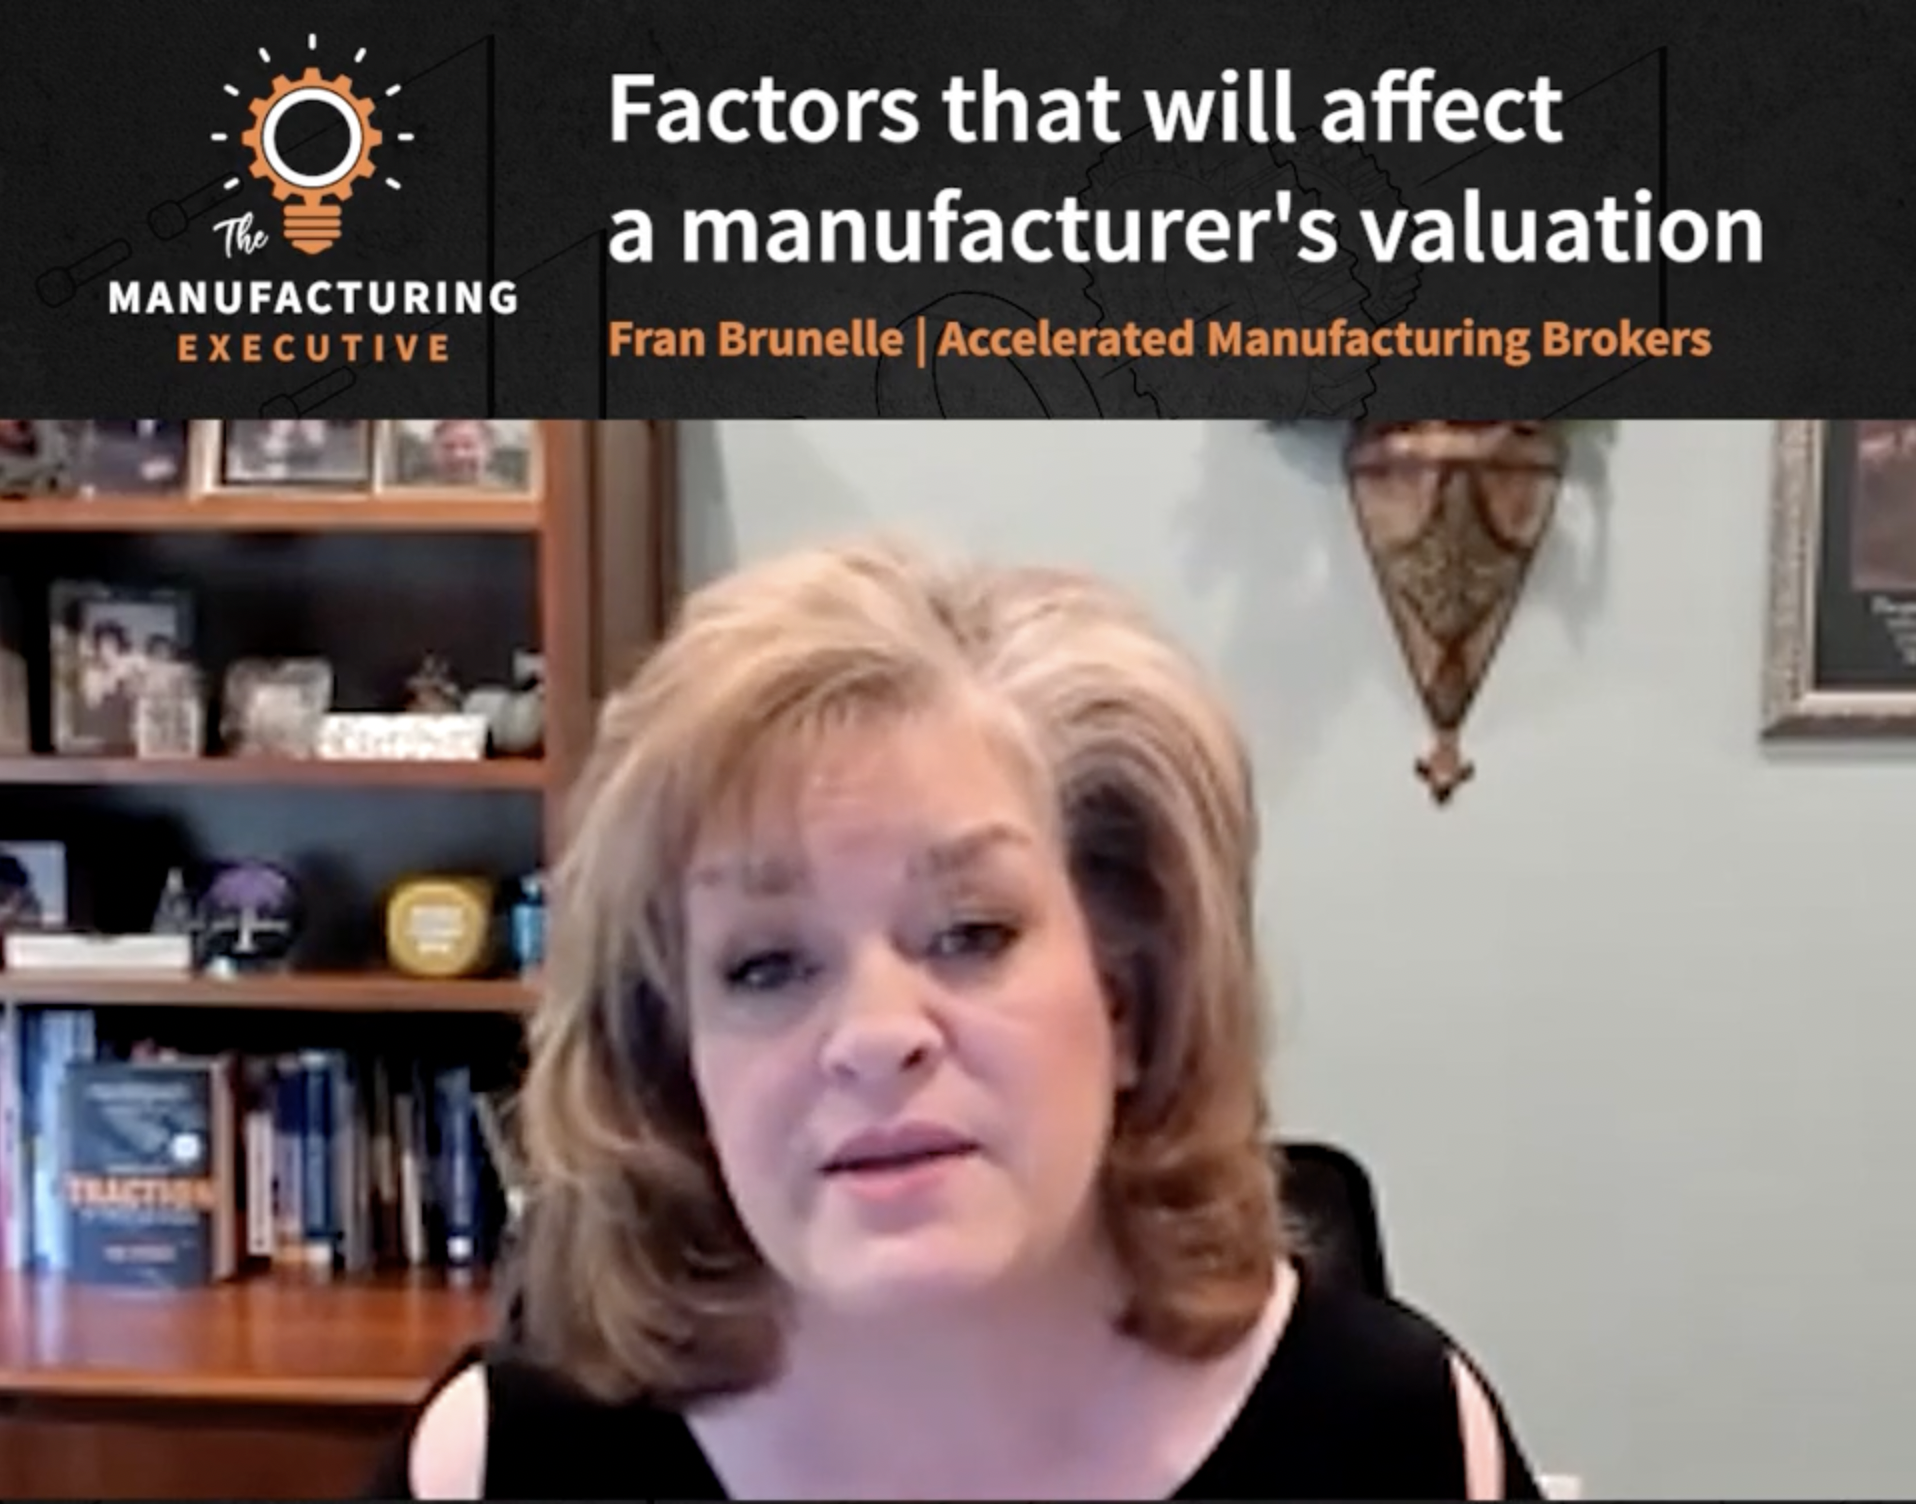 Factors That Will Affect a Manufacturer’s Valuation